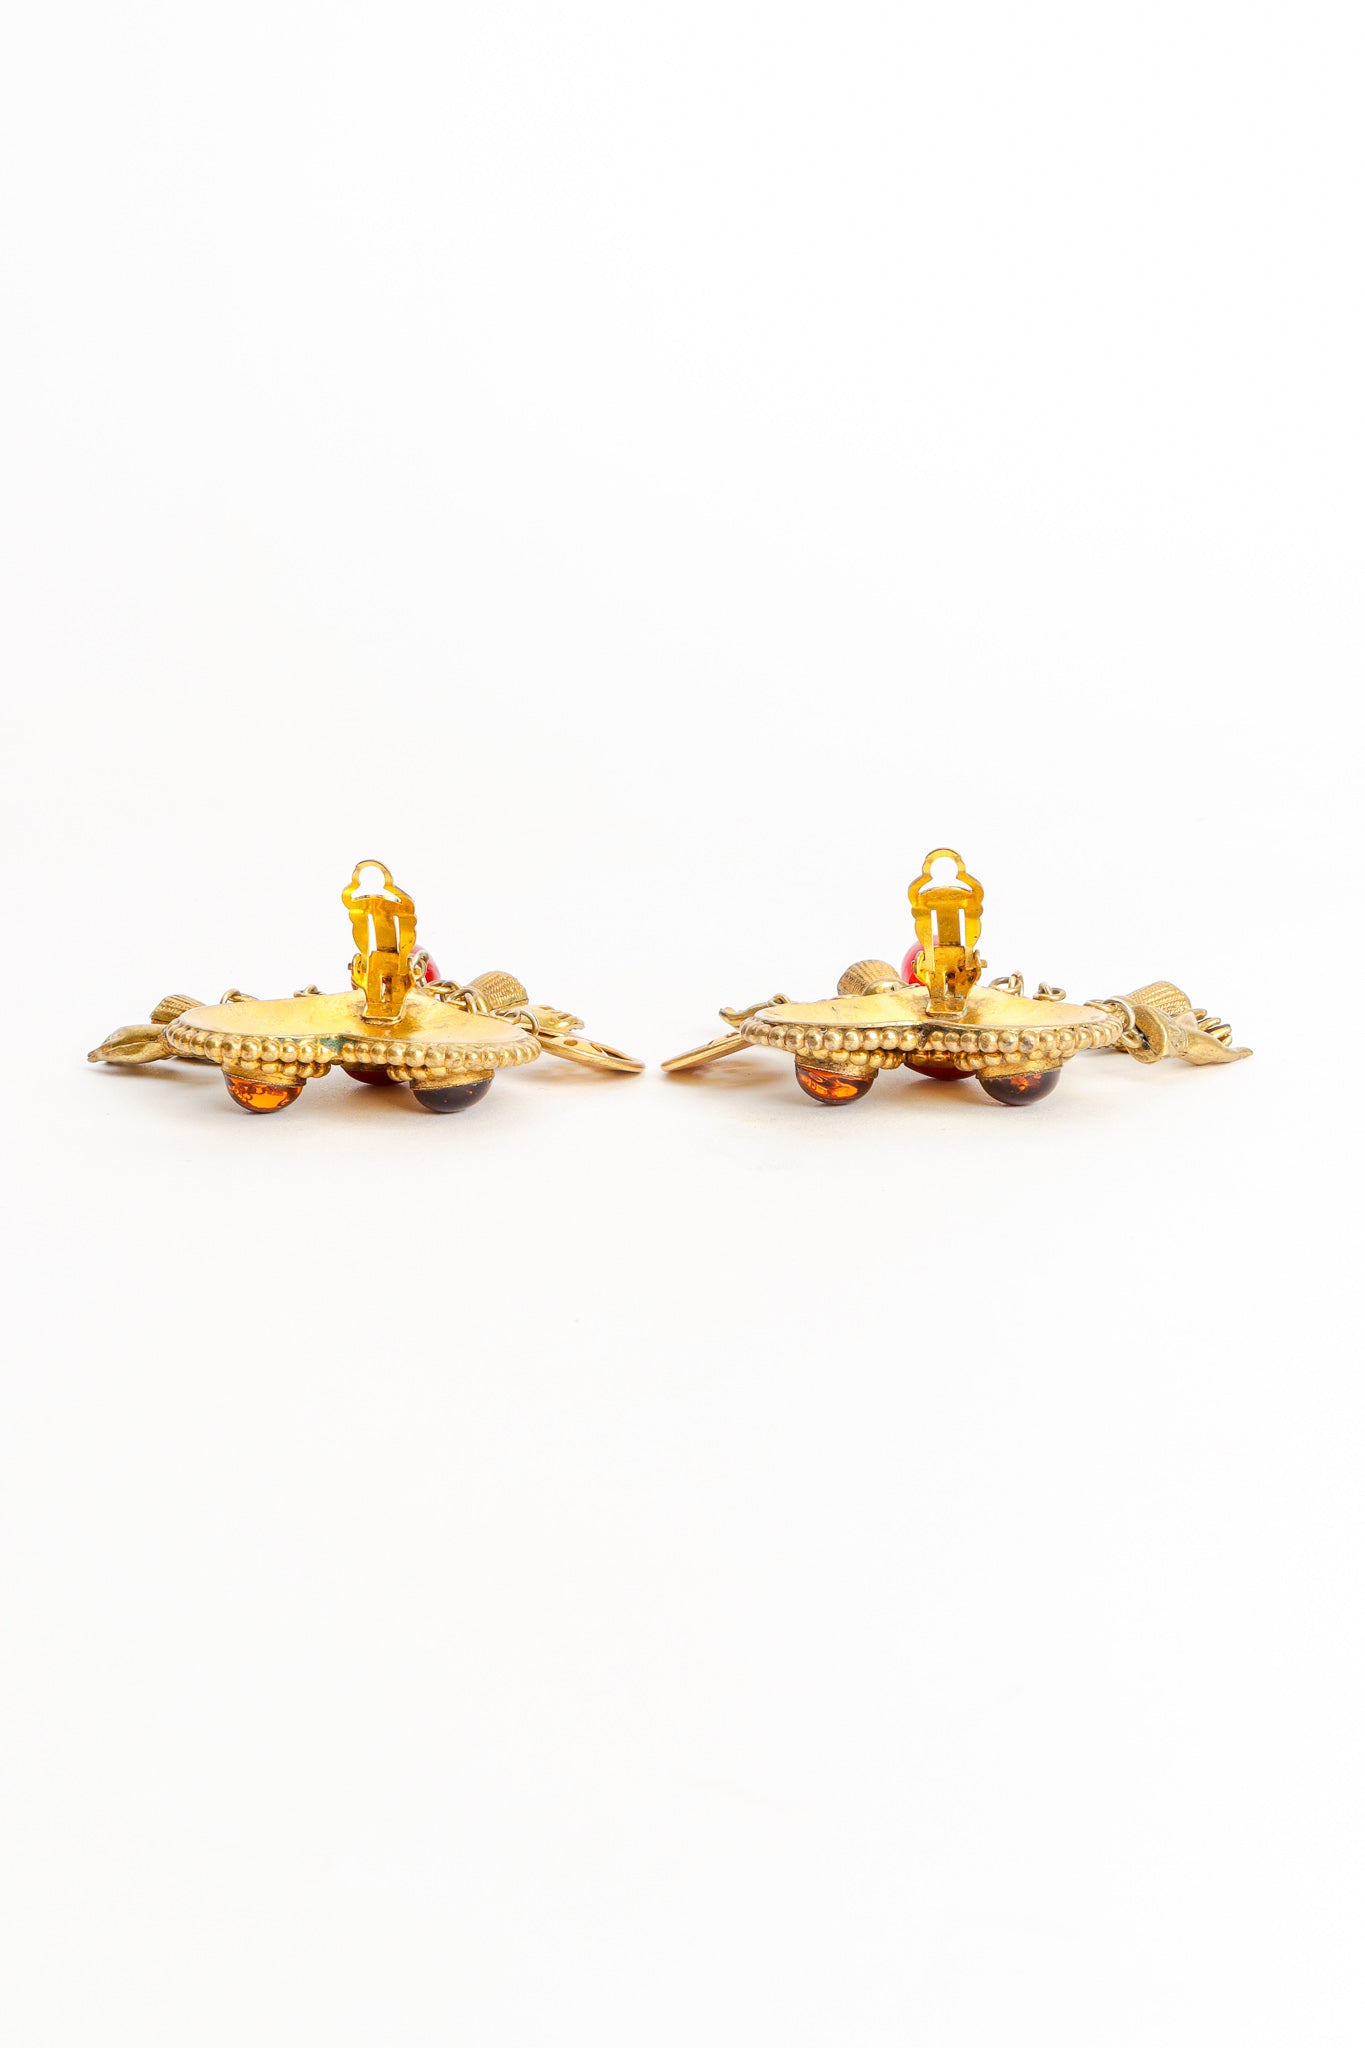 Vintage Isabel Canovas Statement Heart Pendent Charm Earrings post crop at Recess Los Angeles